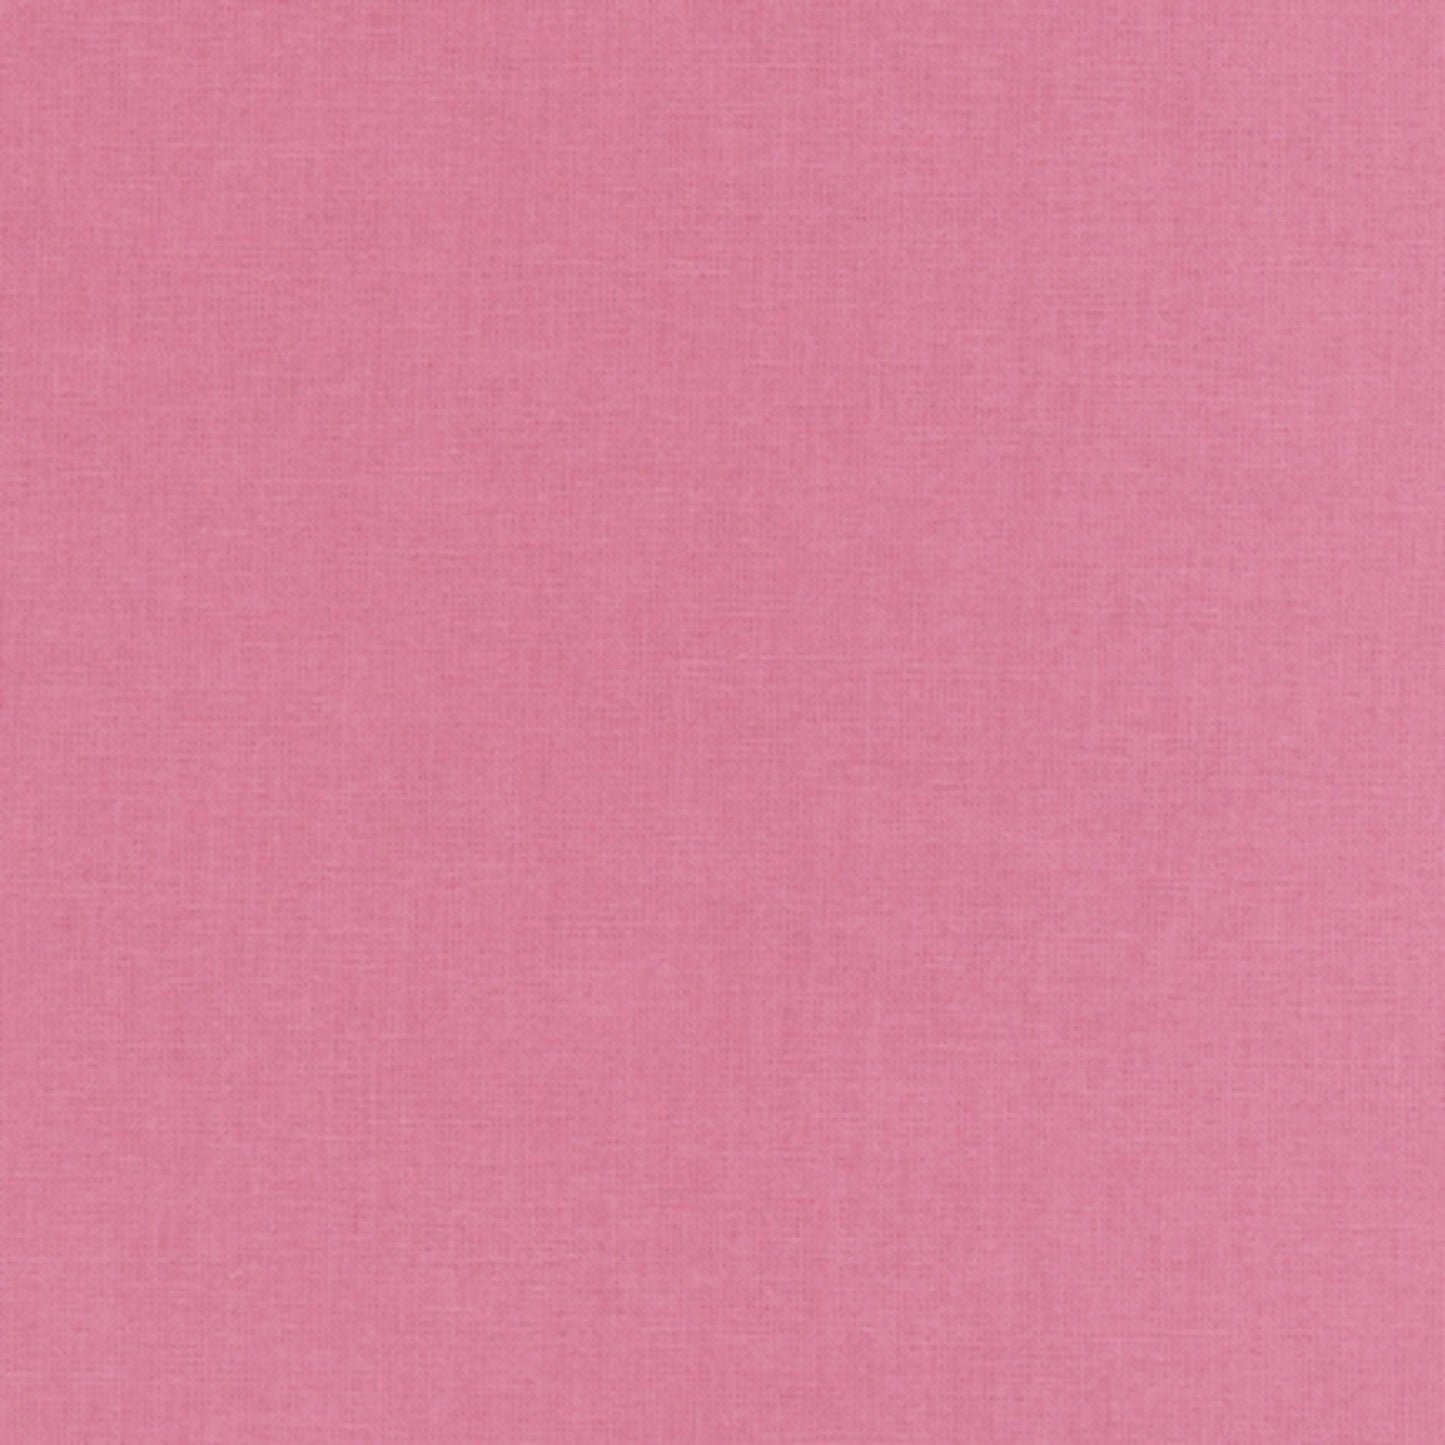 Kona Cotton Solids Rose fabric thumbnail image for true color reference